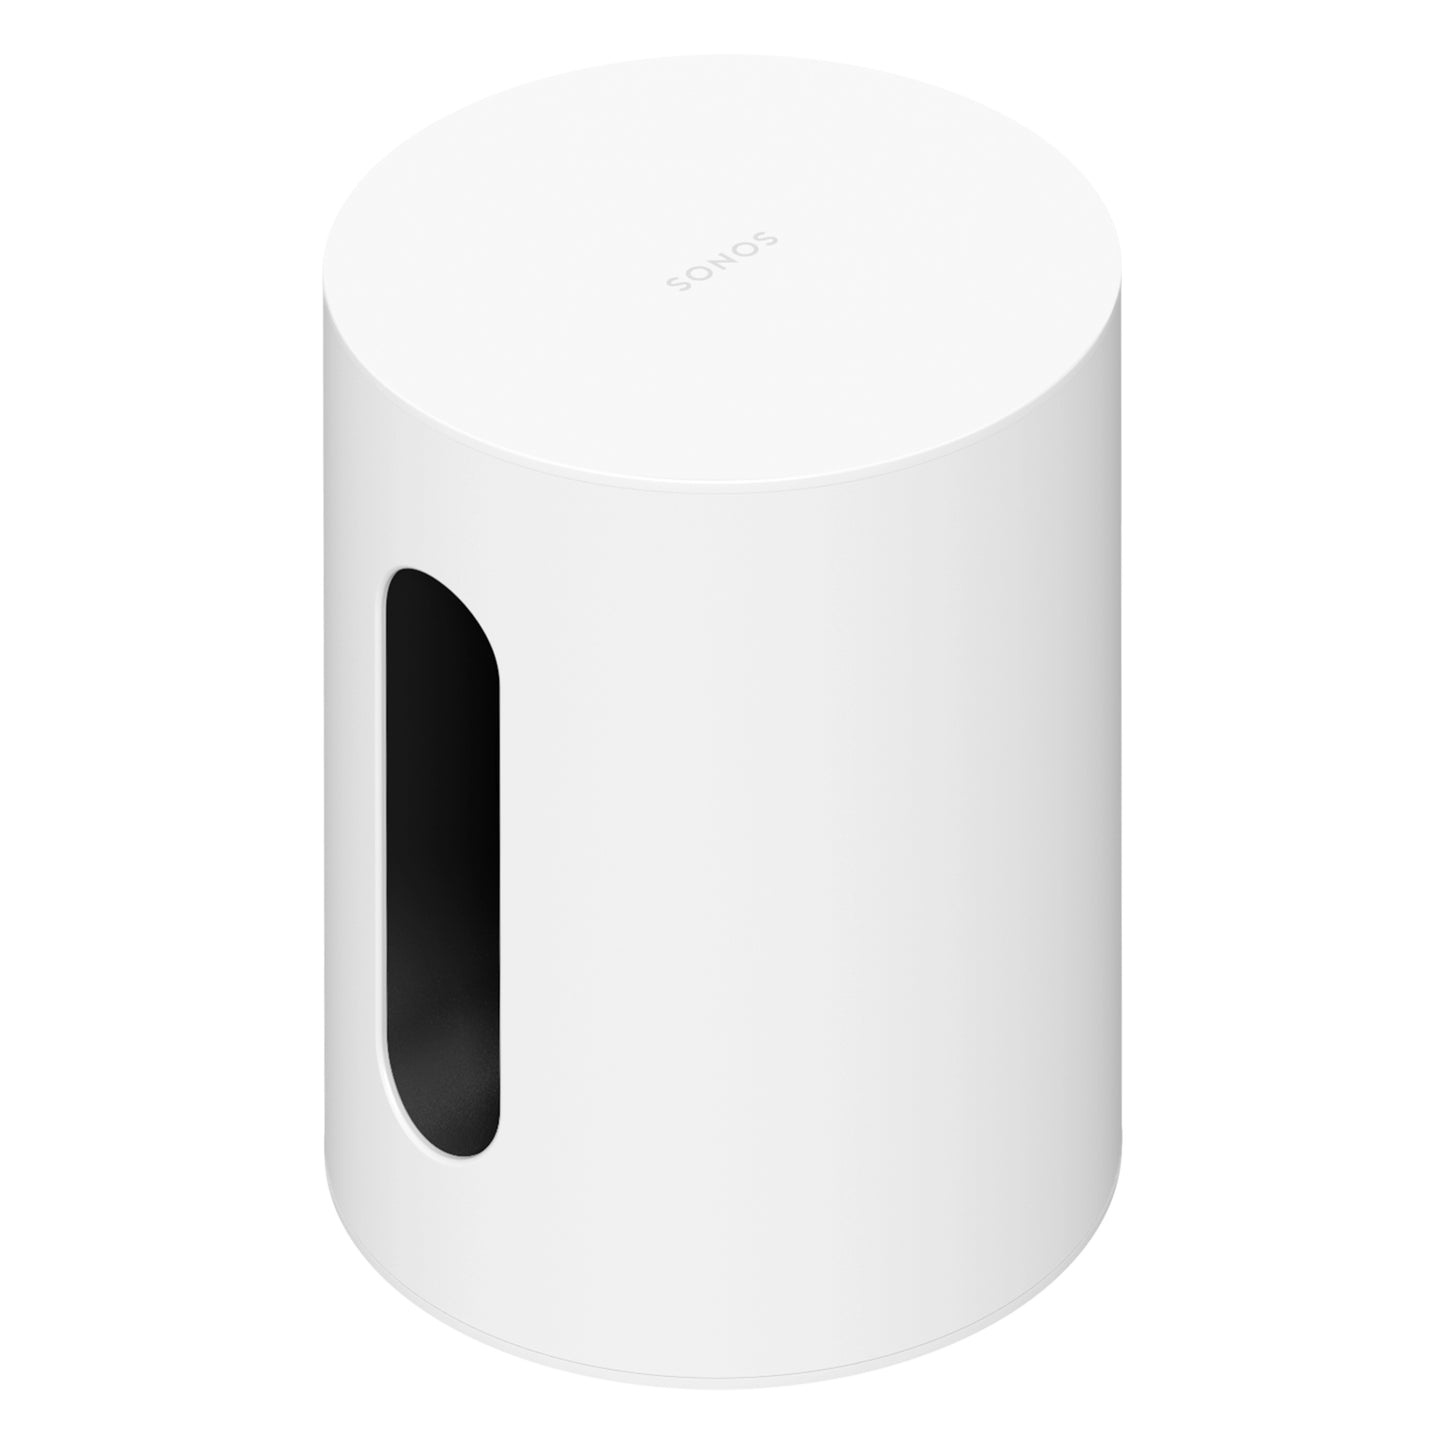 SONOS Immersive Set with Ray